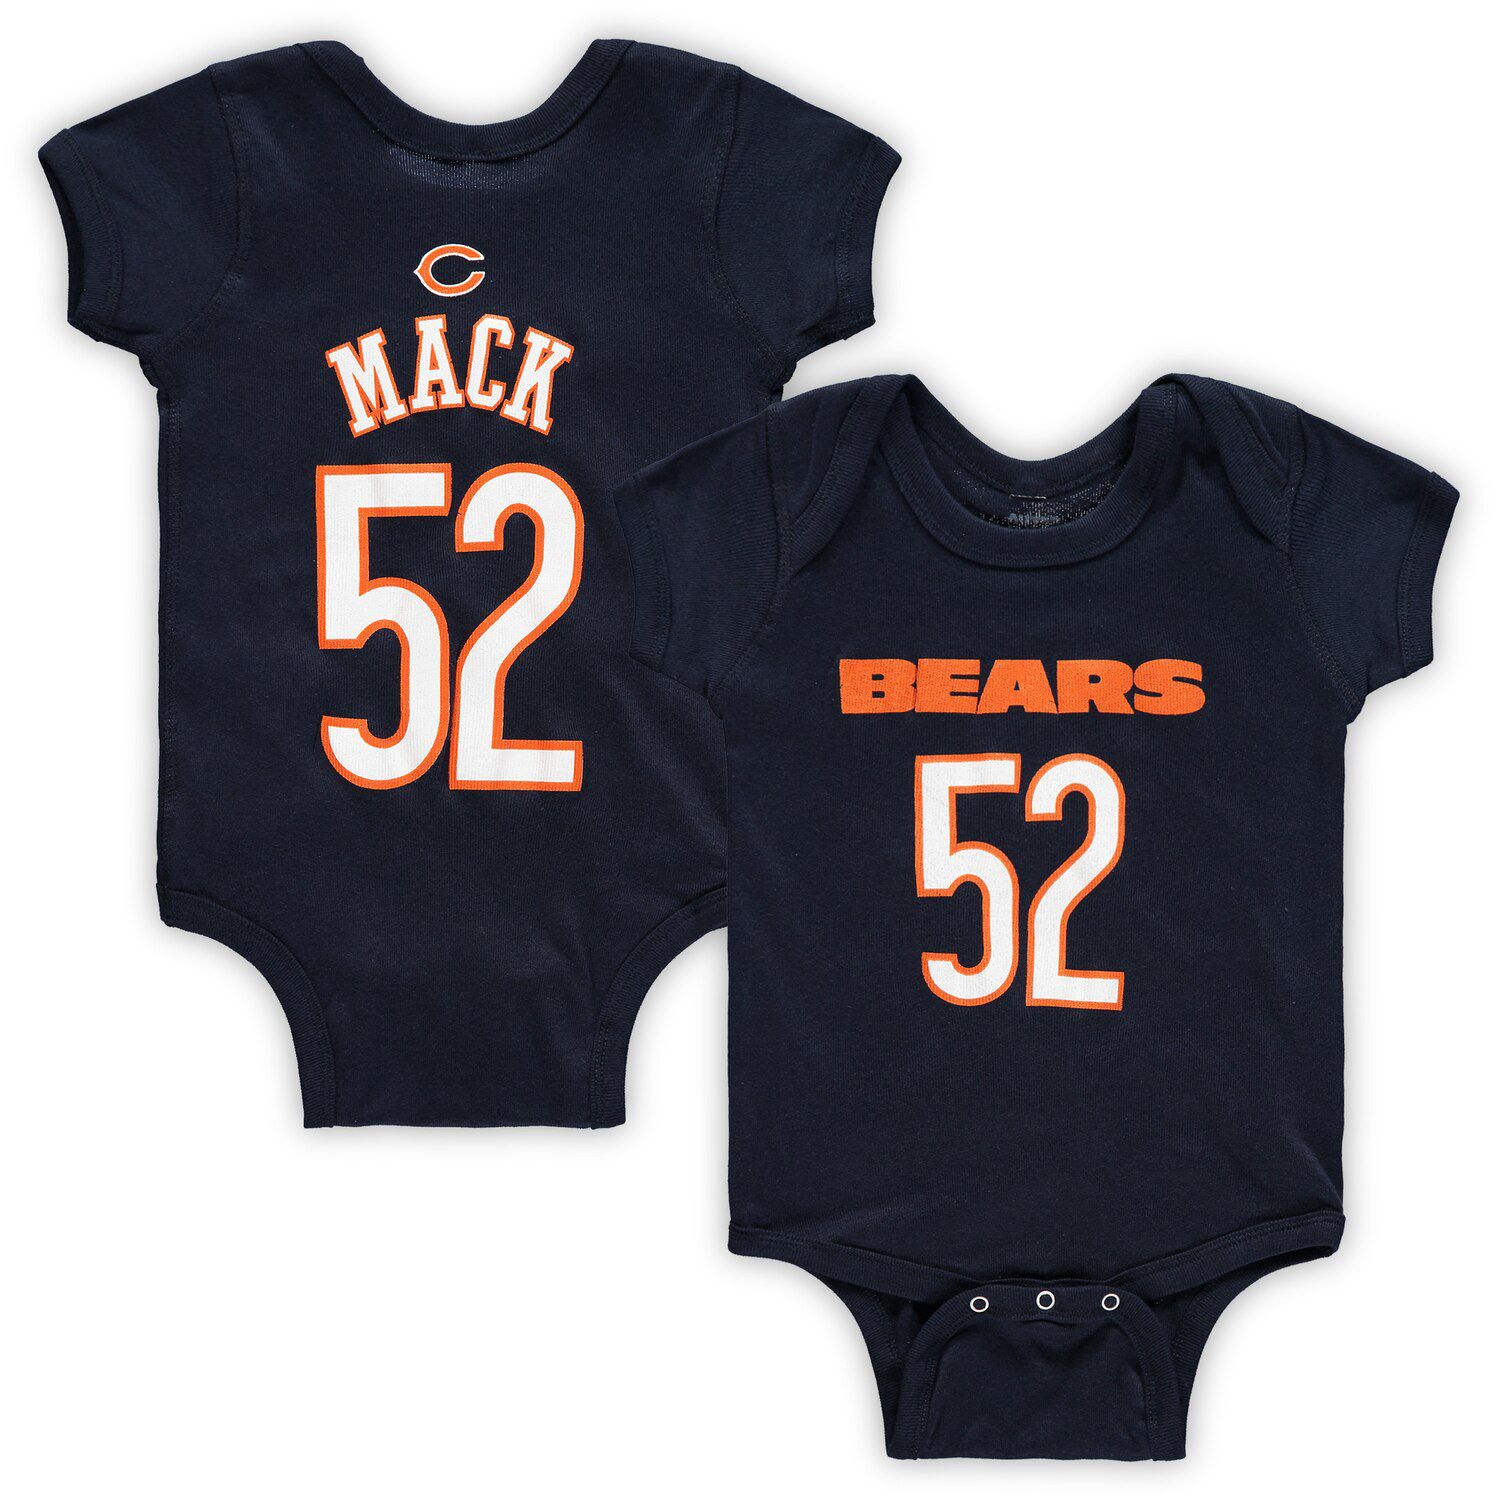 bears jersey for babies